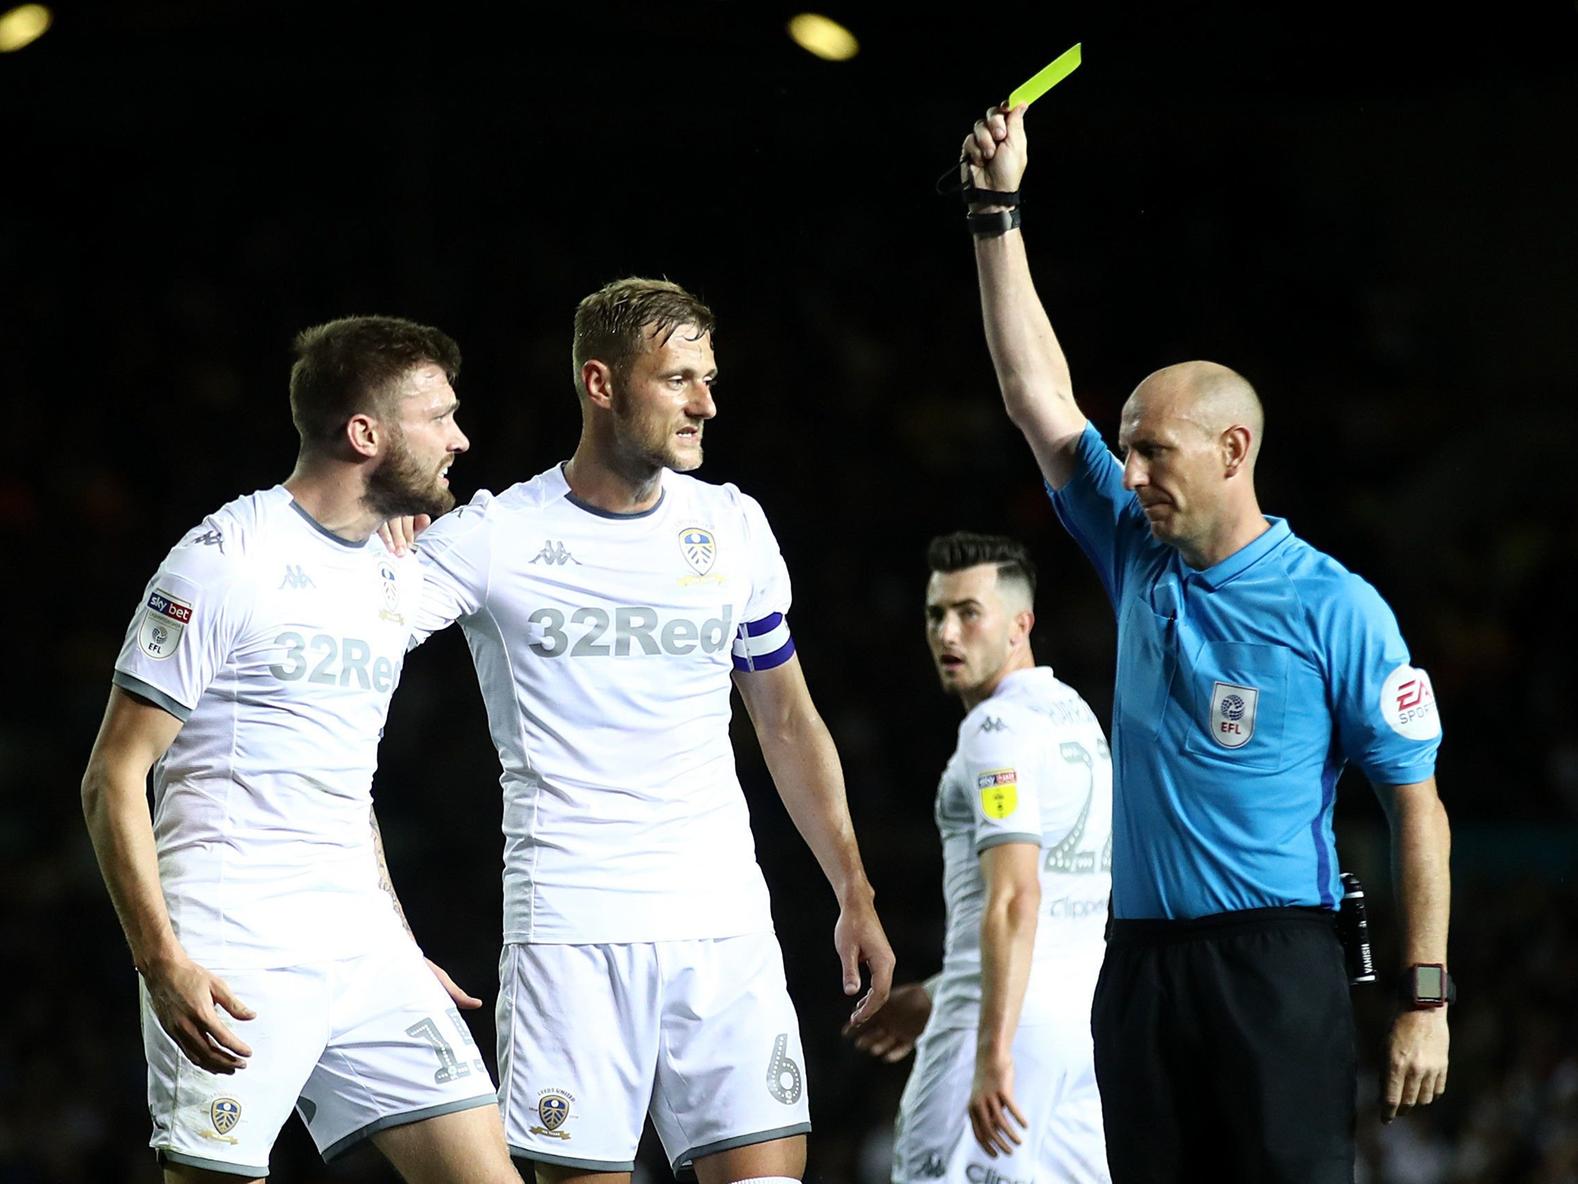 Are Leeds United really THAT dirty?